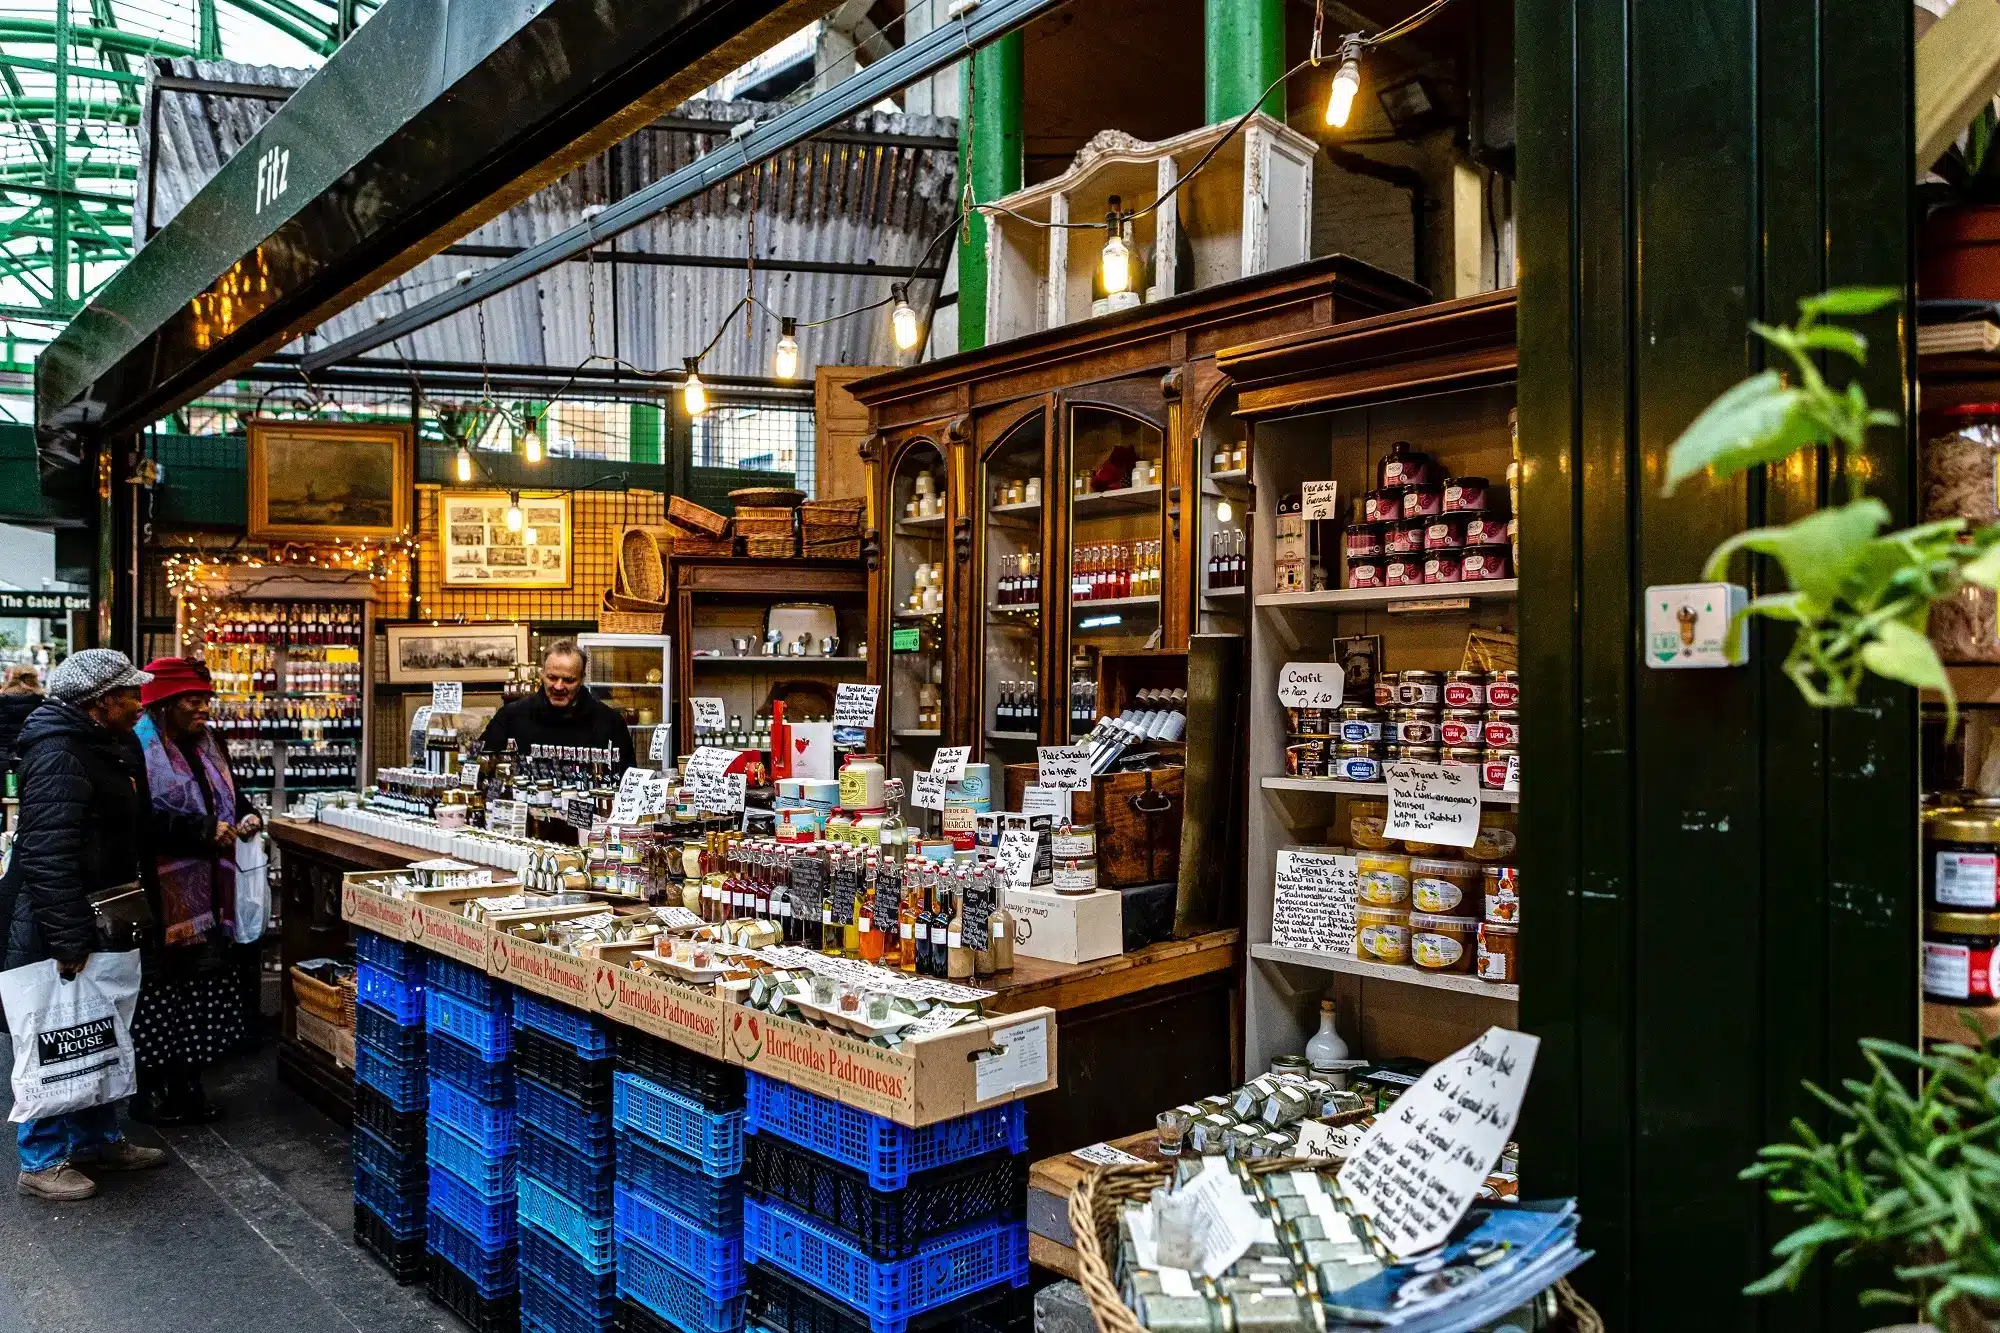 Shops, food and produce in the colorful Borough Market, Southwark, Southbank, London, England, representing the concept of non commercial losses.